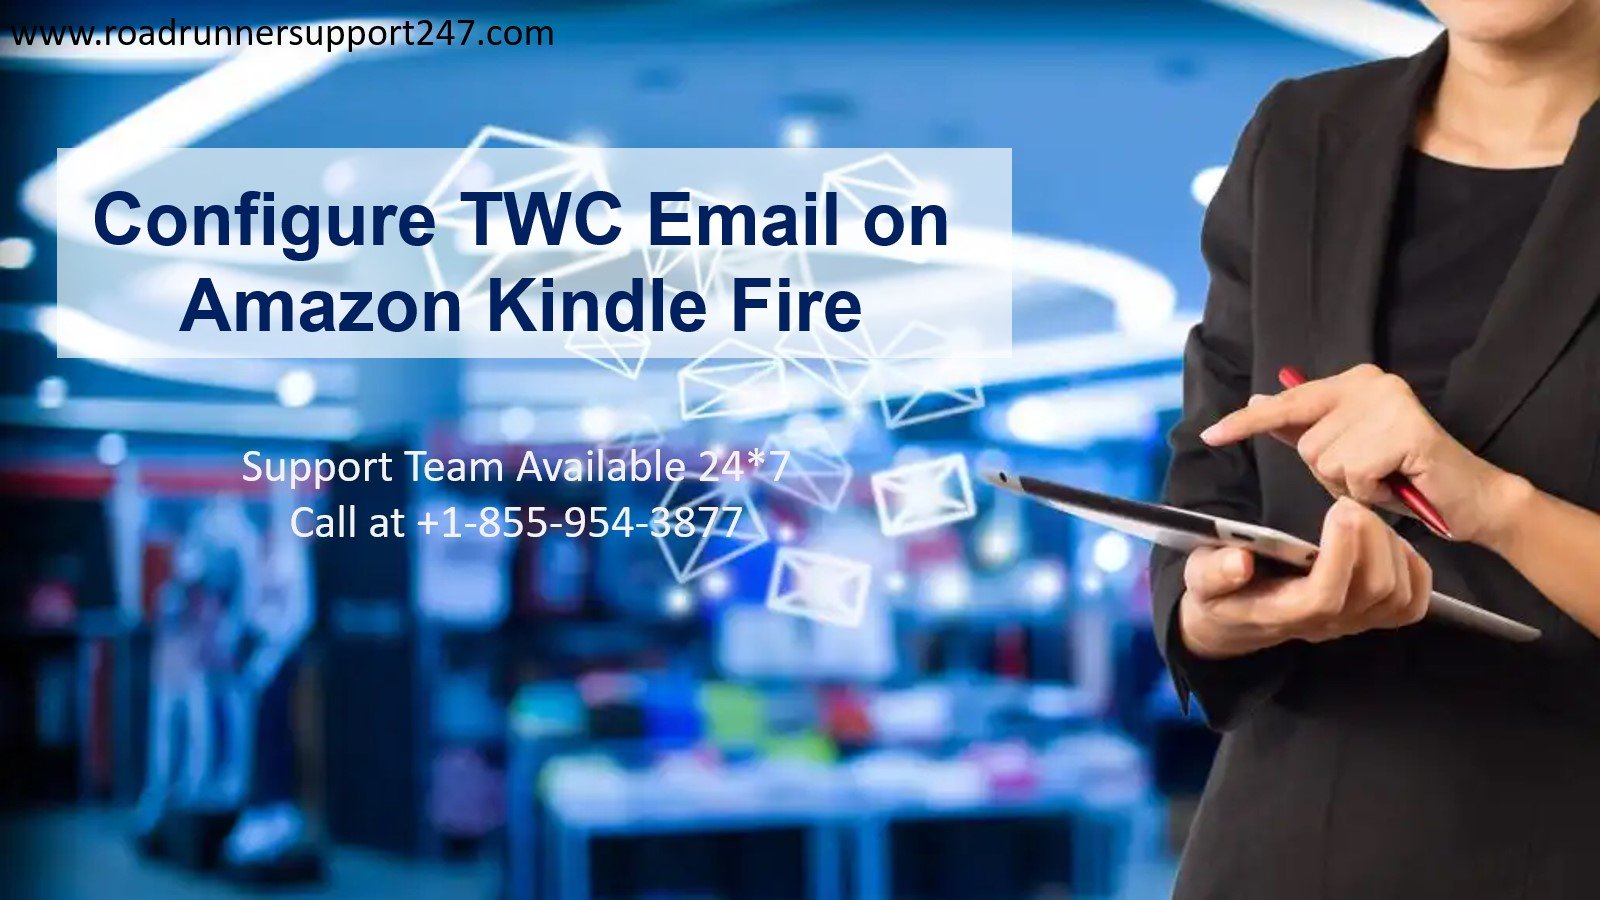 HOW TO CONFIGURE TWC EMAIL ON AMAZON KINDLE FIRE?